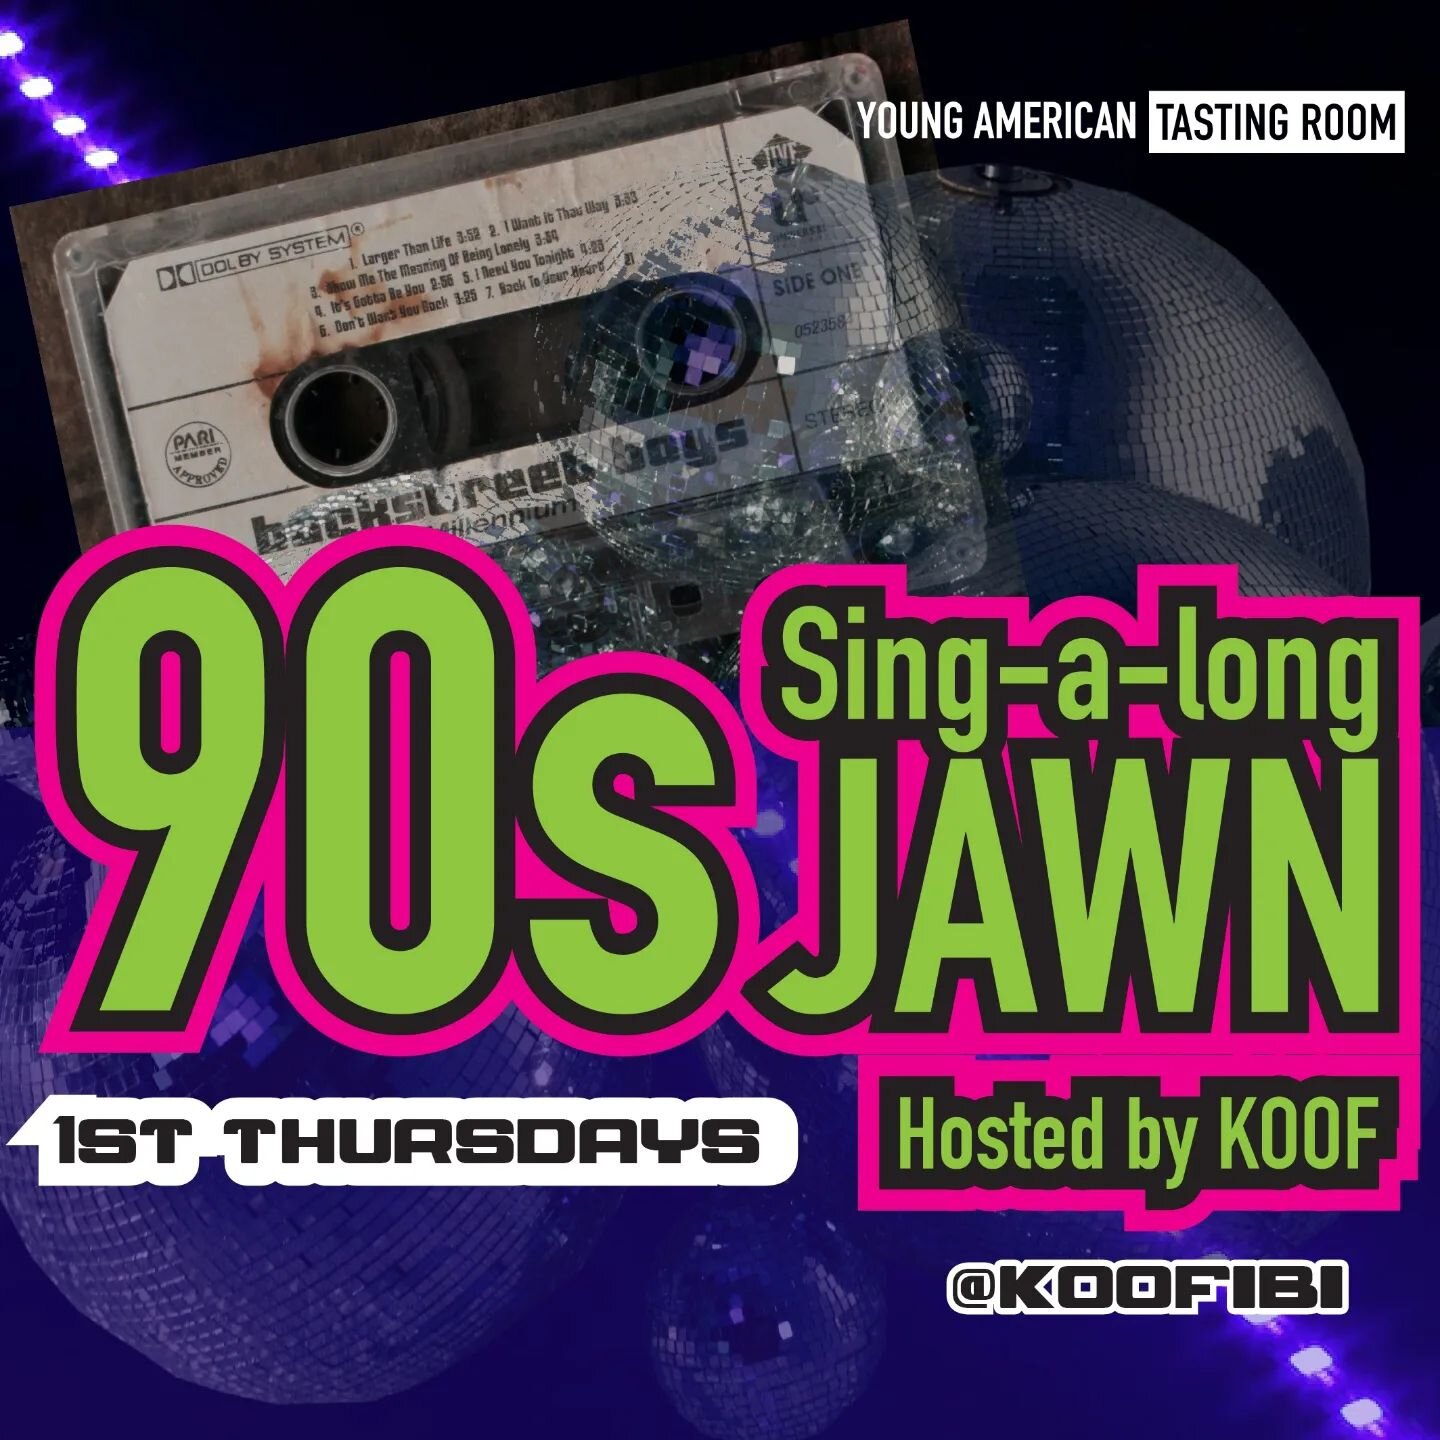 #YoungAmericanMusic presents: 90s Sing-A-Long Jawn hosted by Koof (1st Thursdays, 630-830PM). Grab a drink and join us for a nostalgic dive into one of our favorite music decades! Lyrics will be available - feel free to jump on the mic or sing-a-long